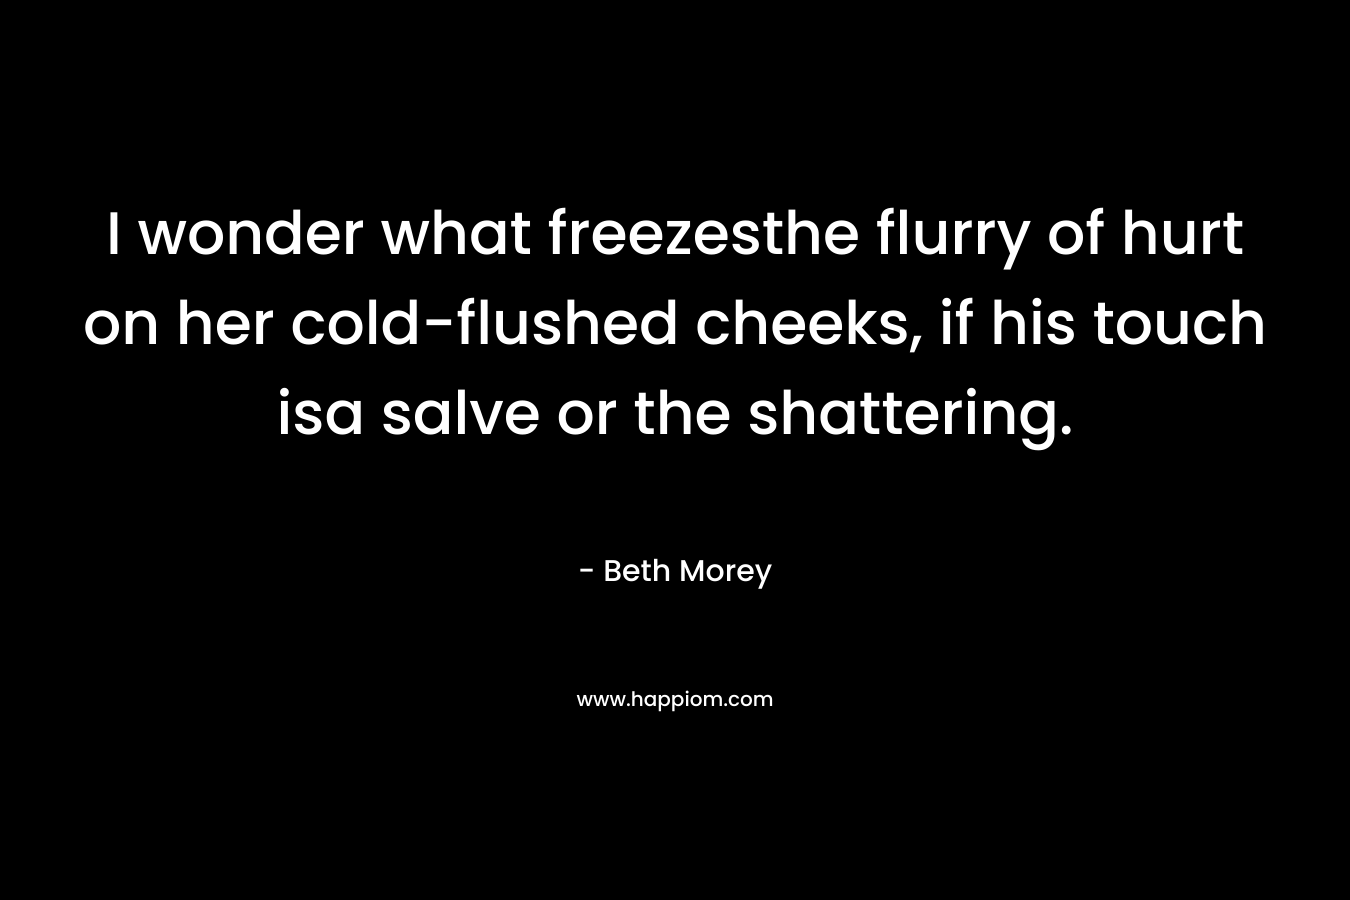 I wonder what freezesthe flurry of hurt on her cold-flushed cheeks, if his touch isa salve or the shattering. – Beth Morey